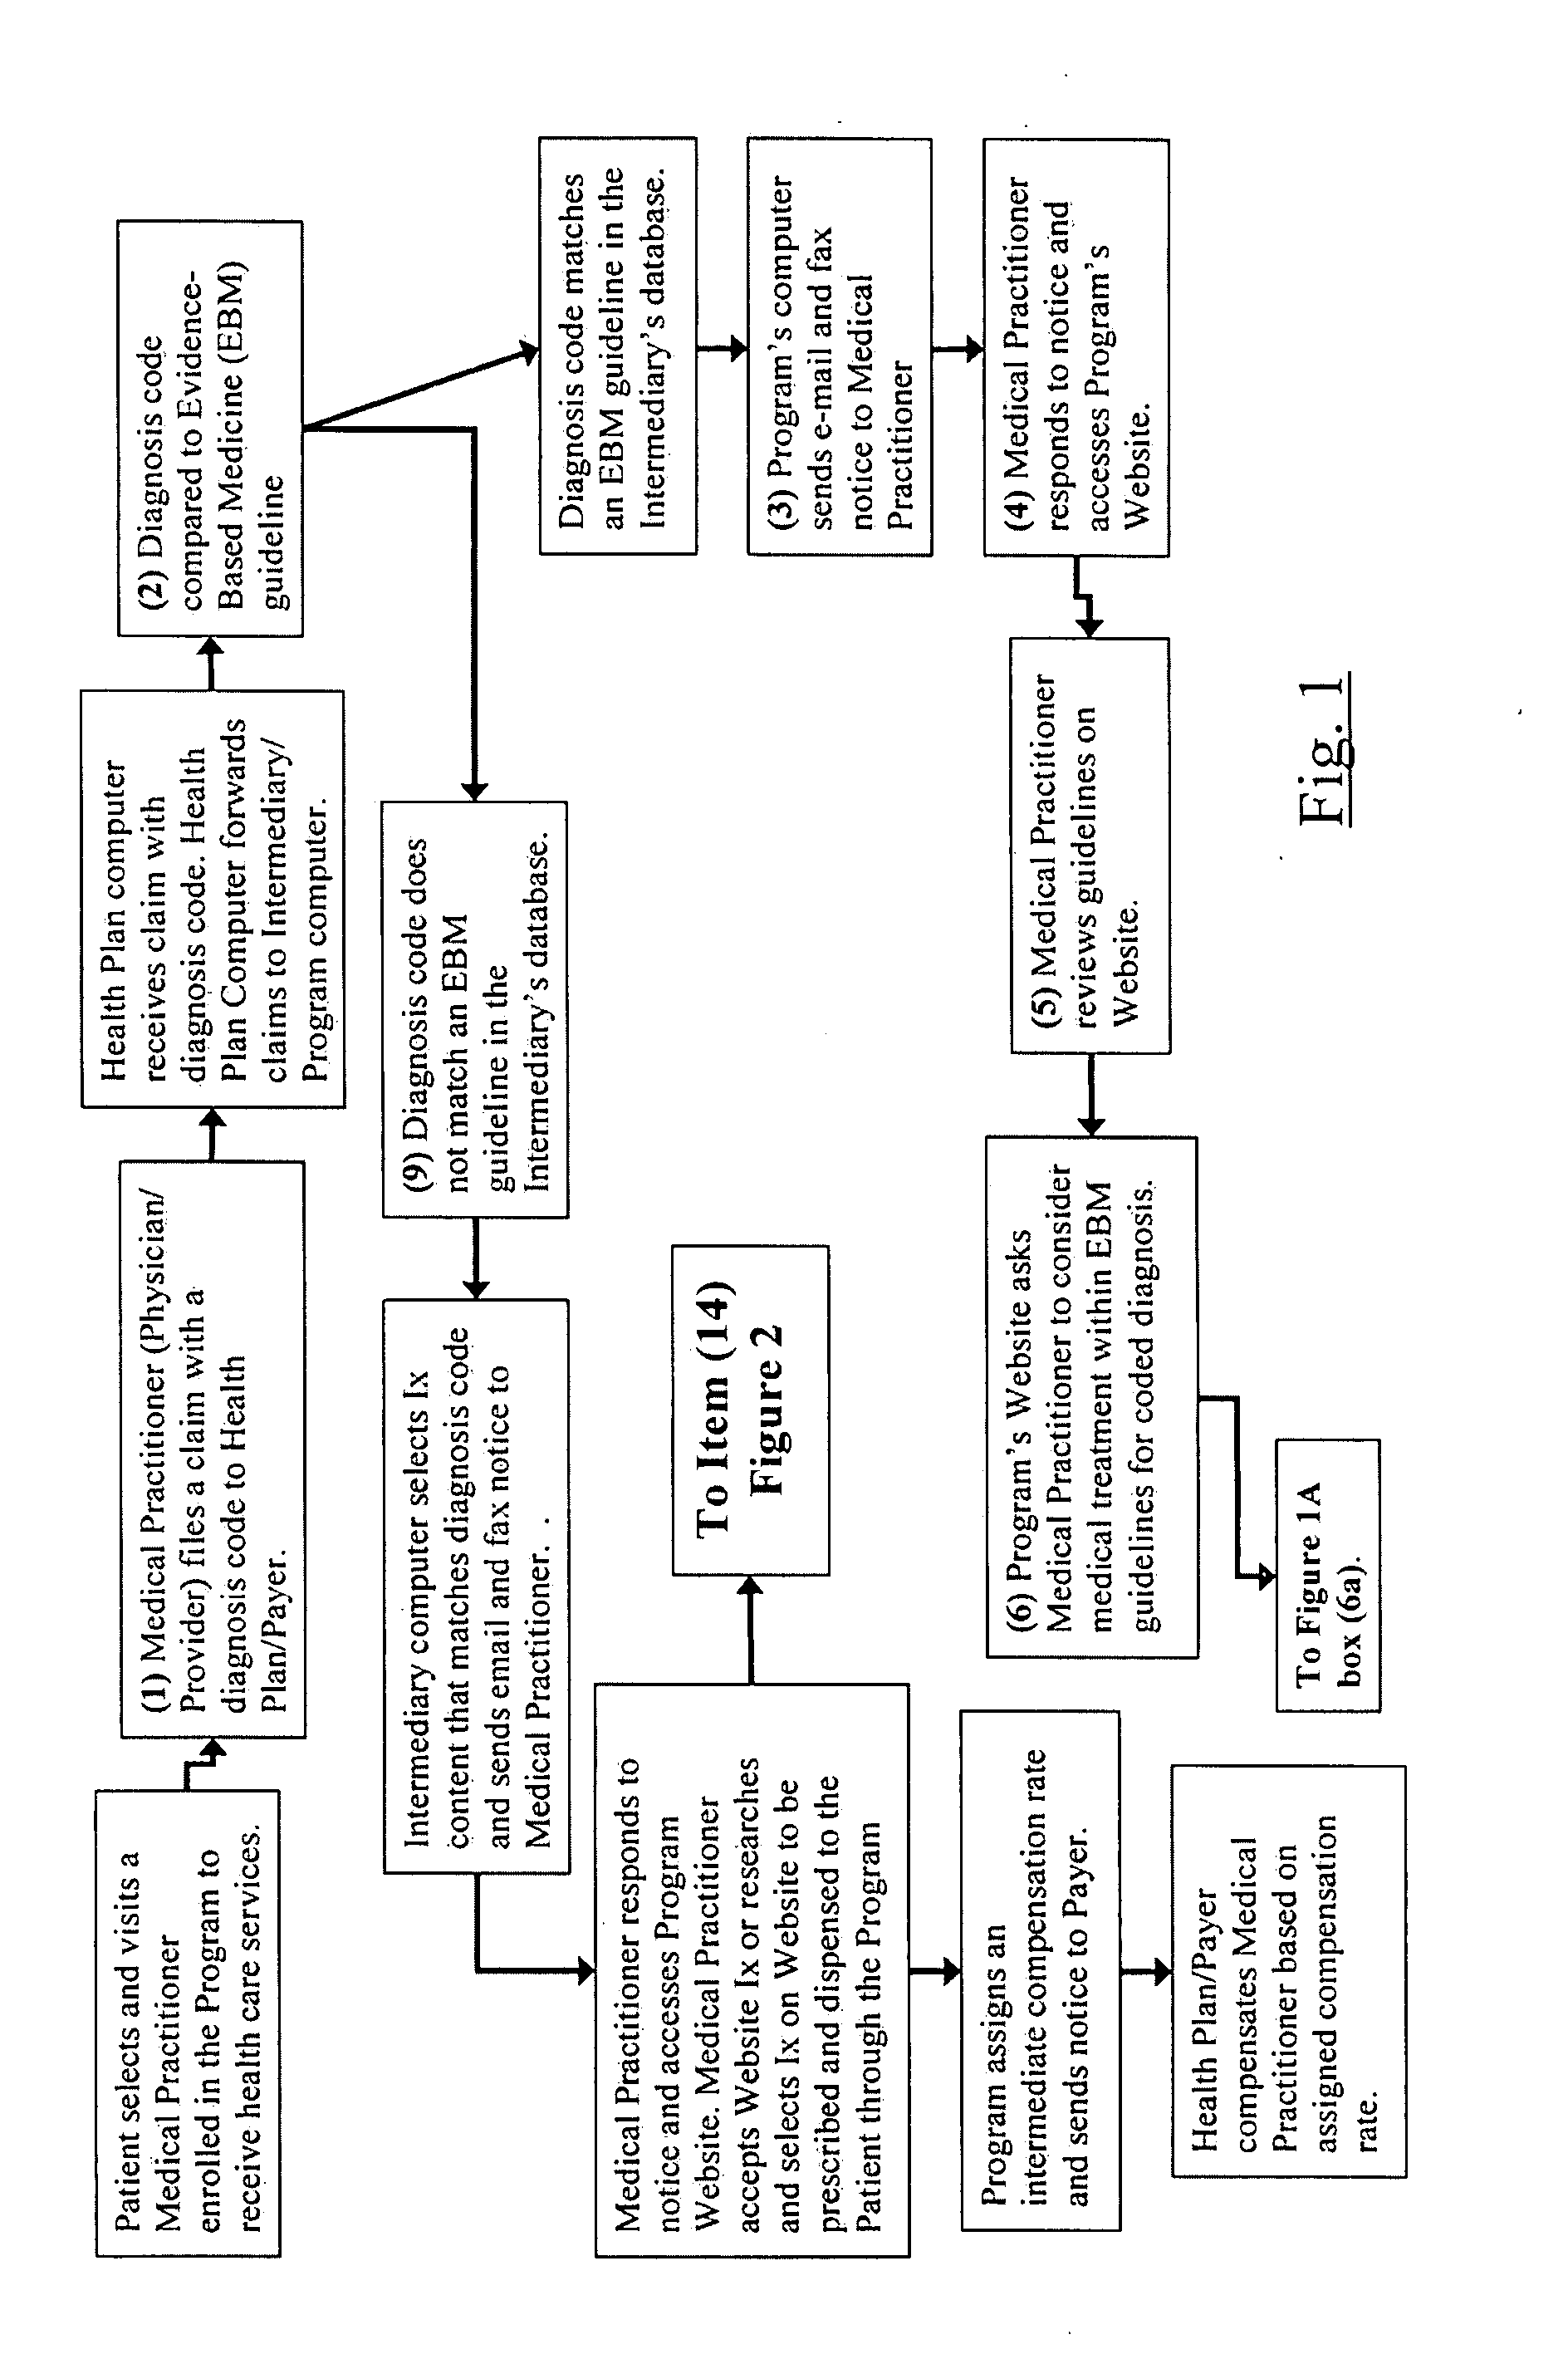 Method and System for Delivery of Healthcare Services